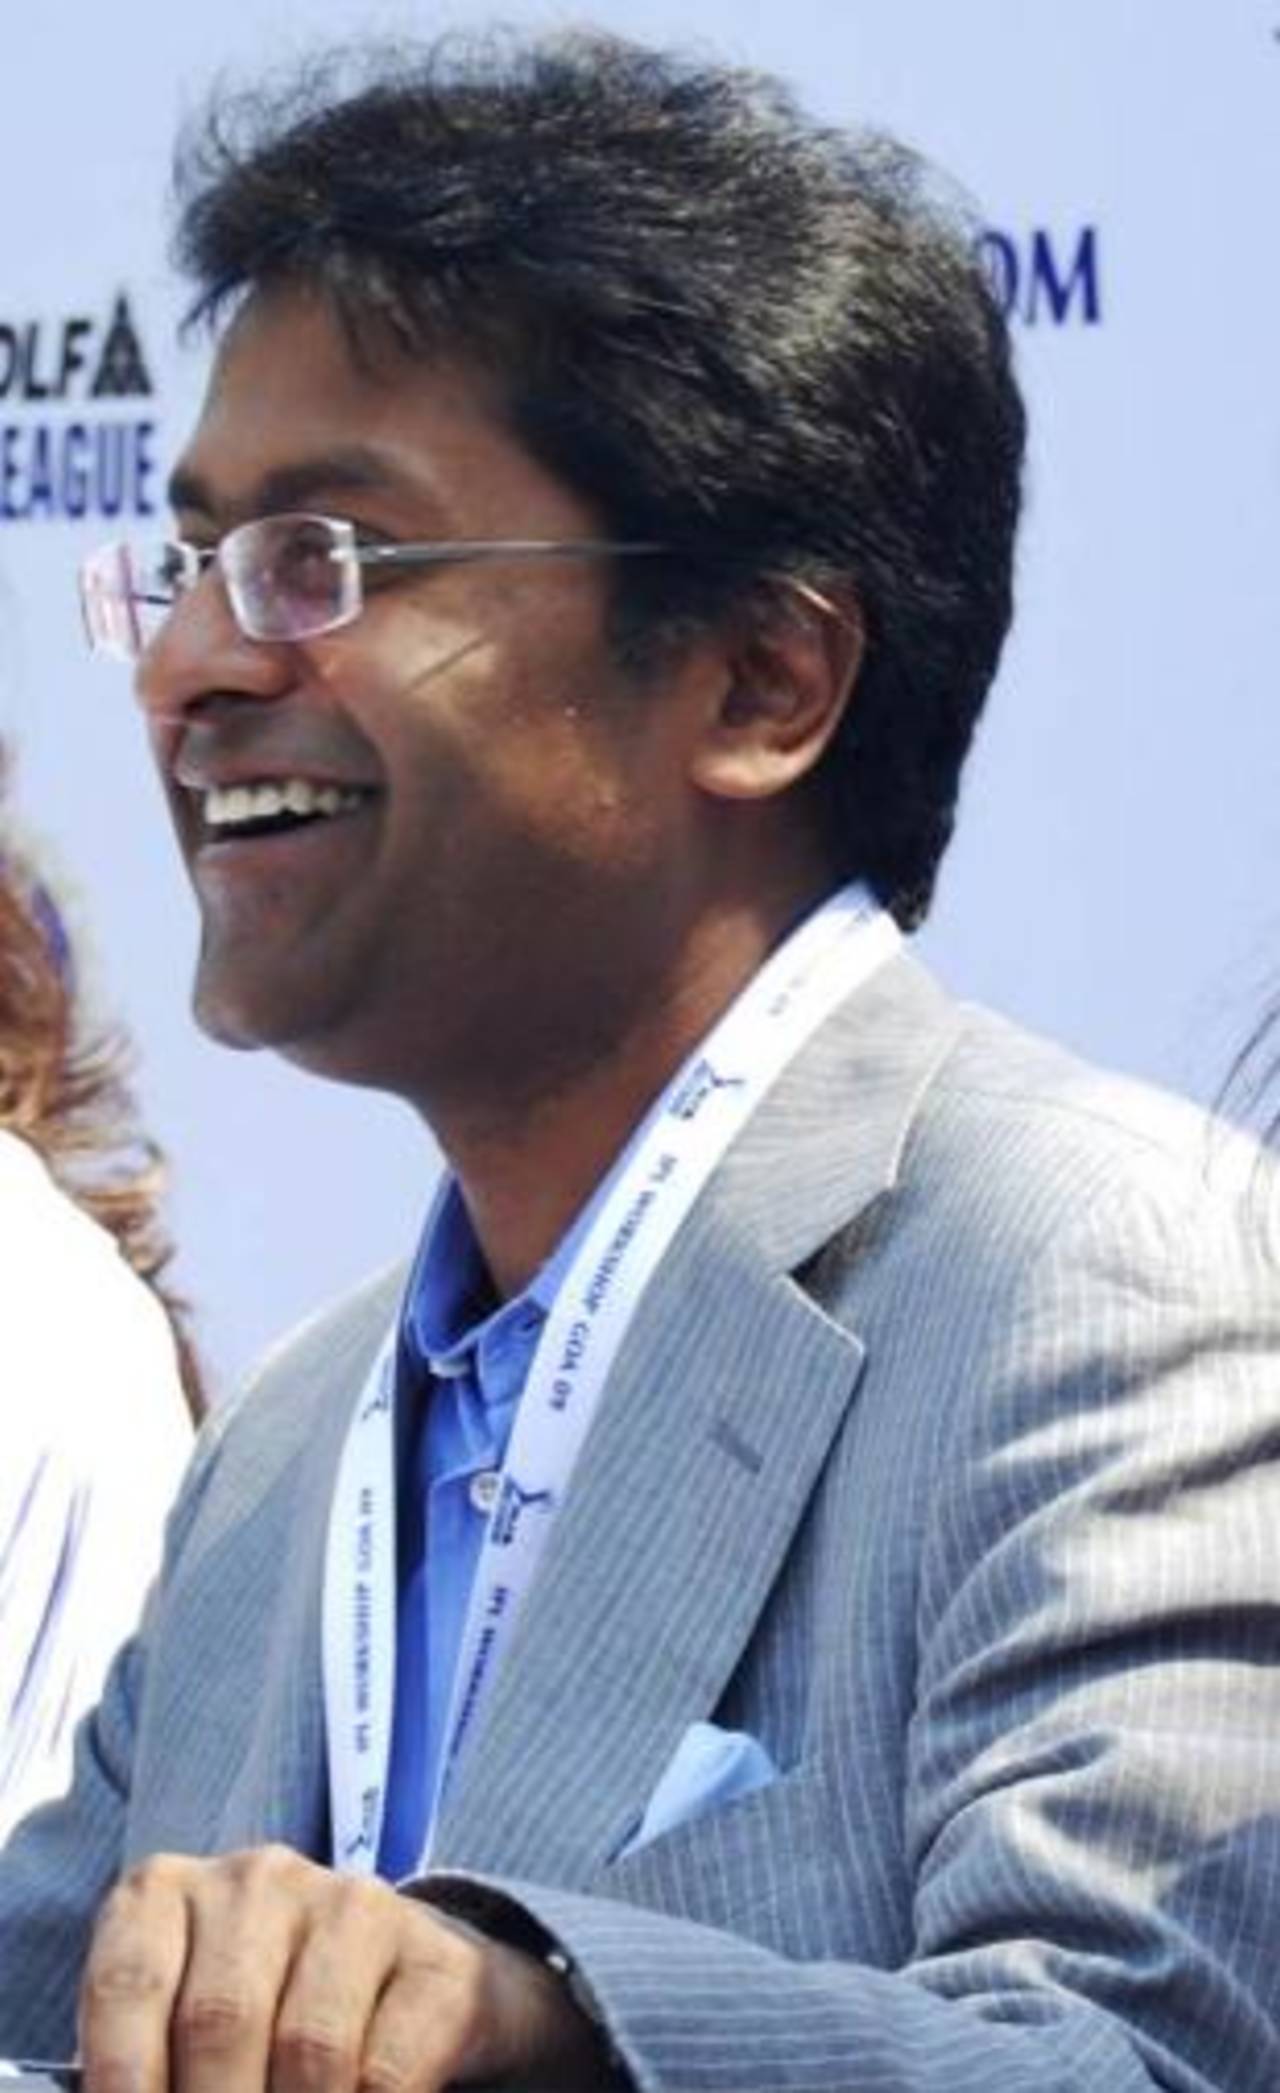 Lalit Modi at the player auction in Goa in London, February 6, 2009